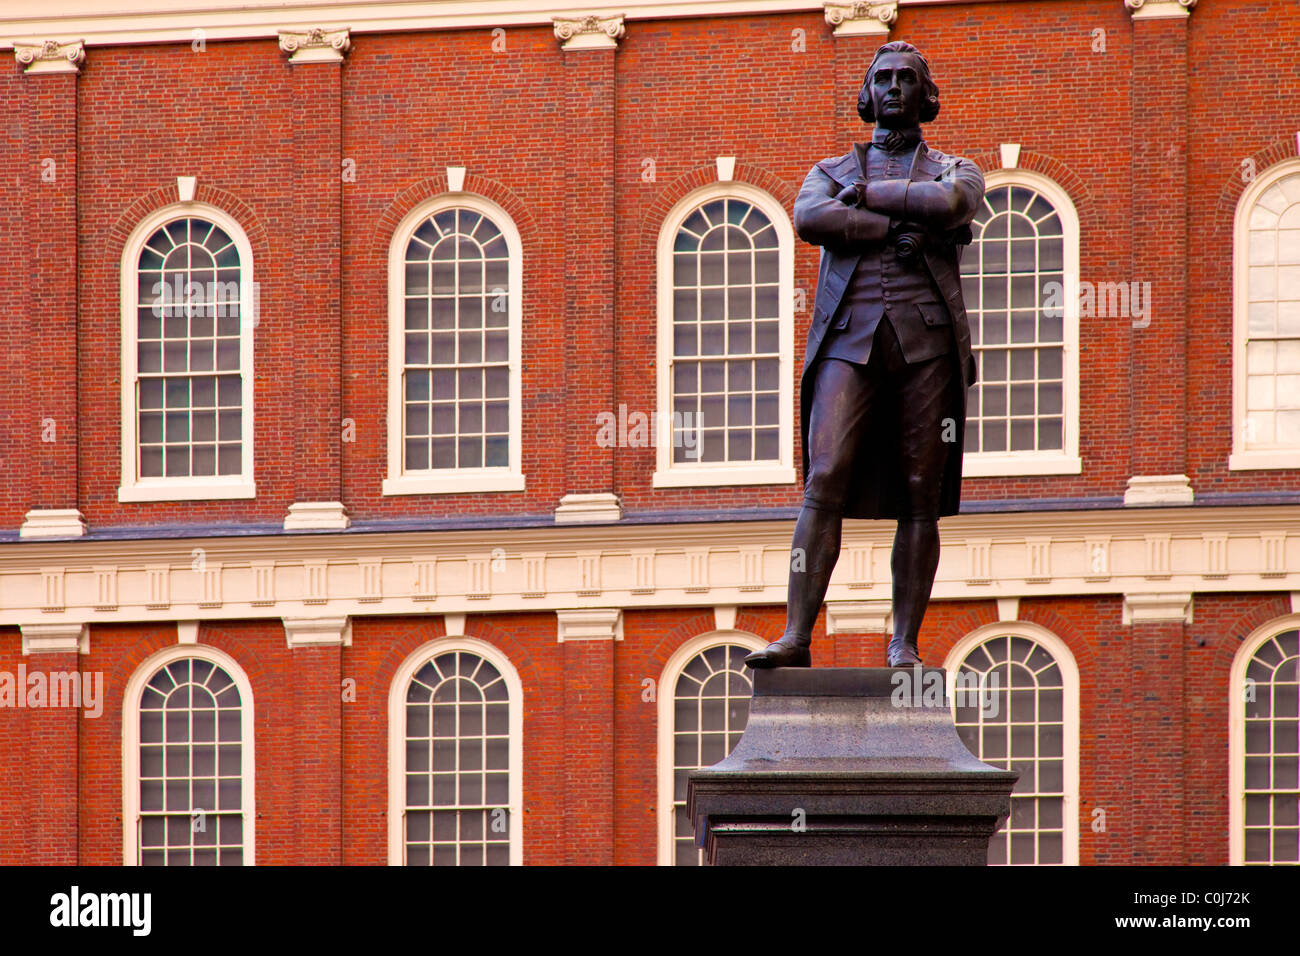 Statue of Samuel Adams, one of the strongest voices for the American Revolution in front of Faneuil Hall, Boston Massachusetts Stock Photo